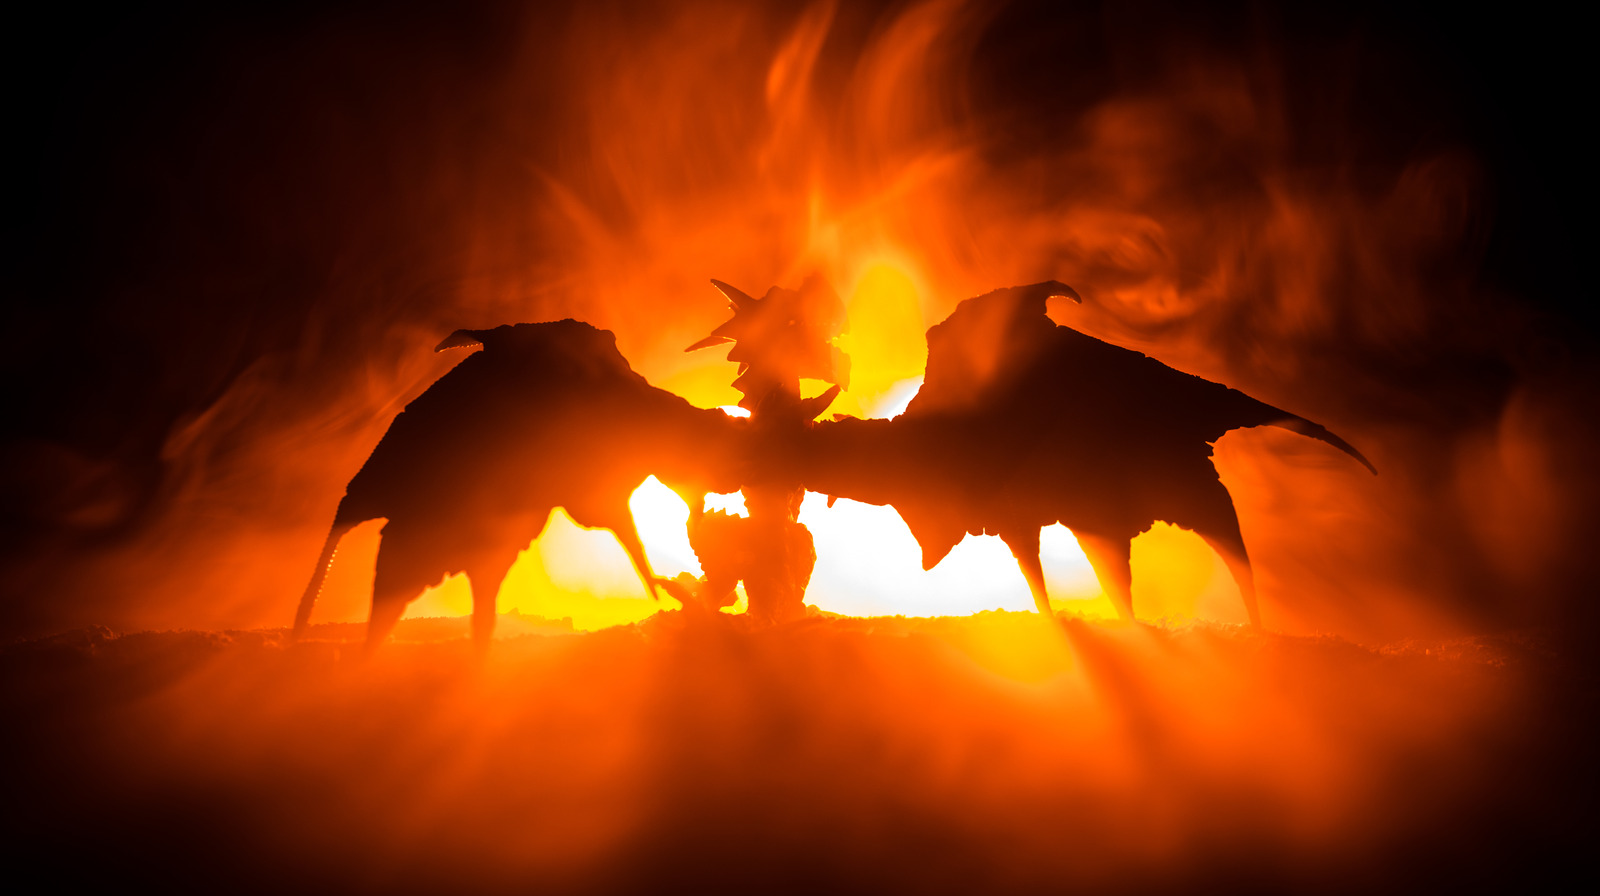 Flying and Fire Breathing Dragons: The Science